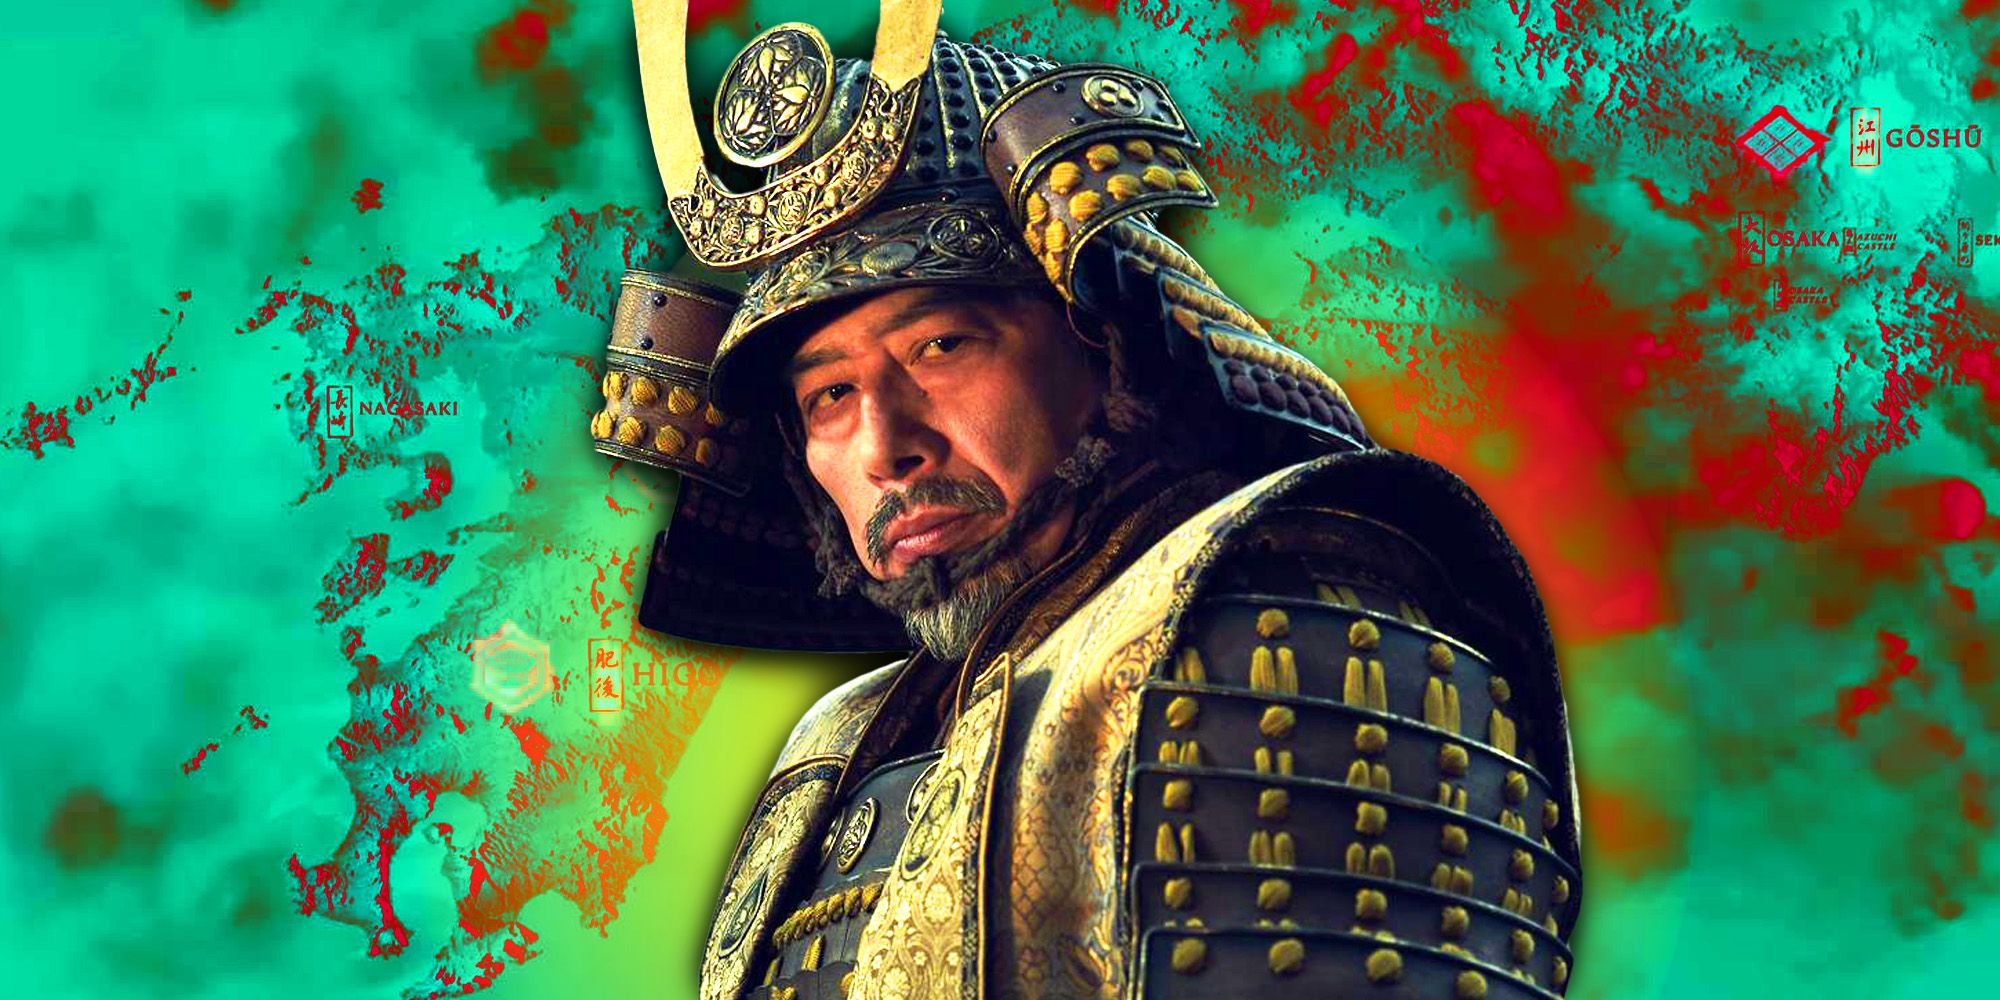 Where Was Shogun Filmed? The Historical Drama’s Filming Locations Explained